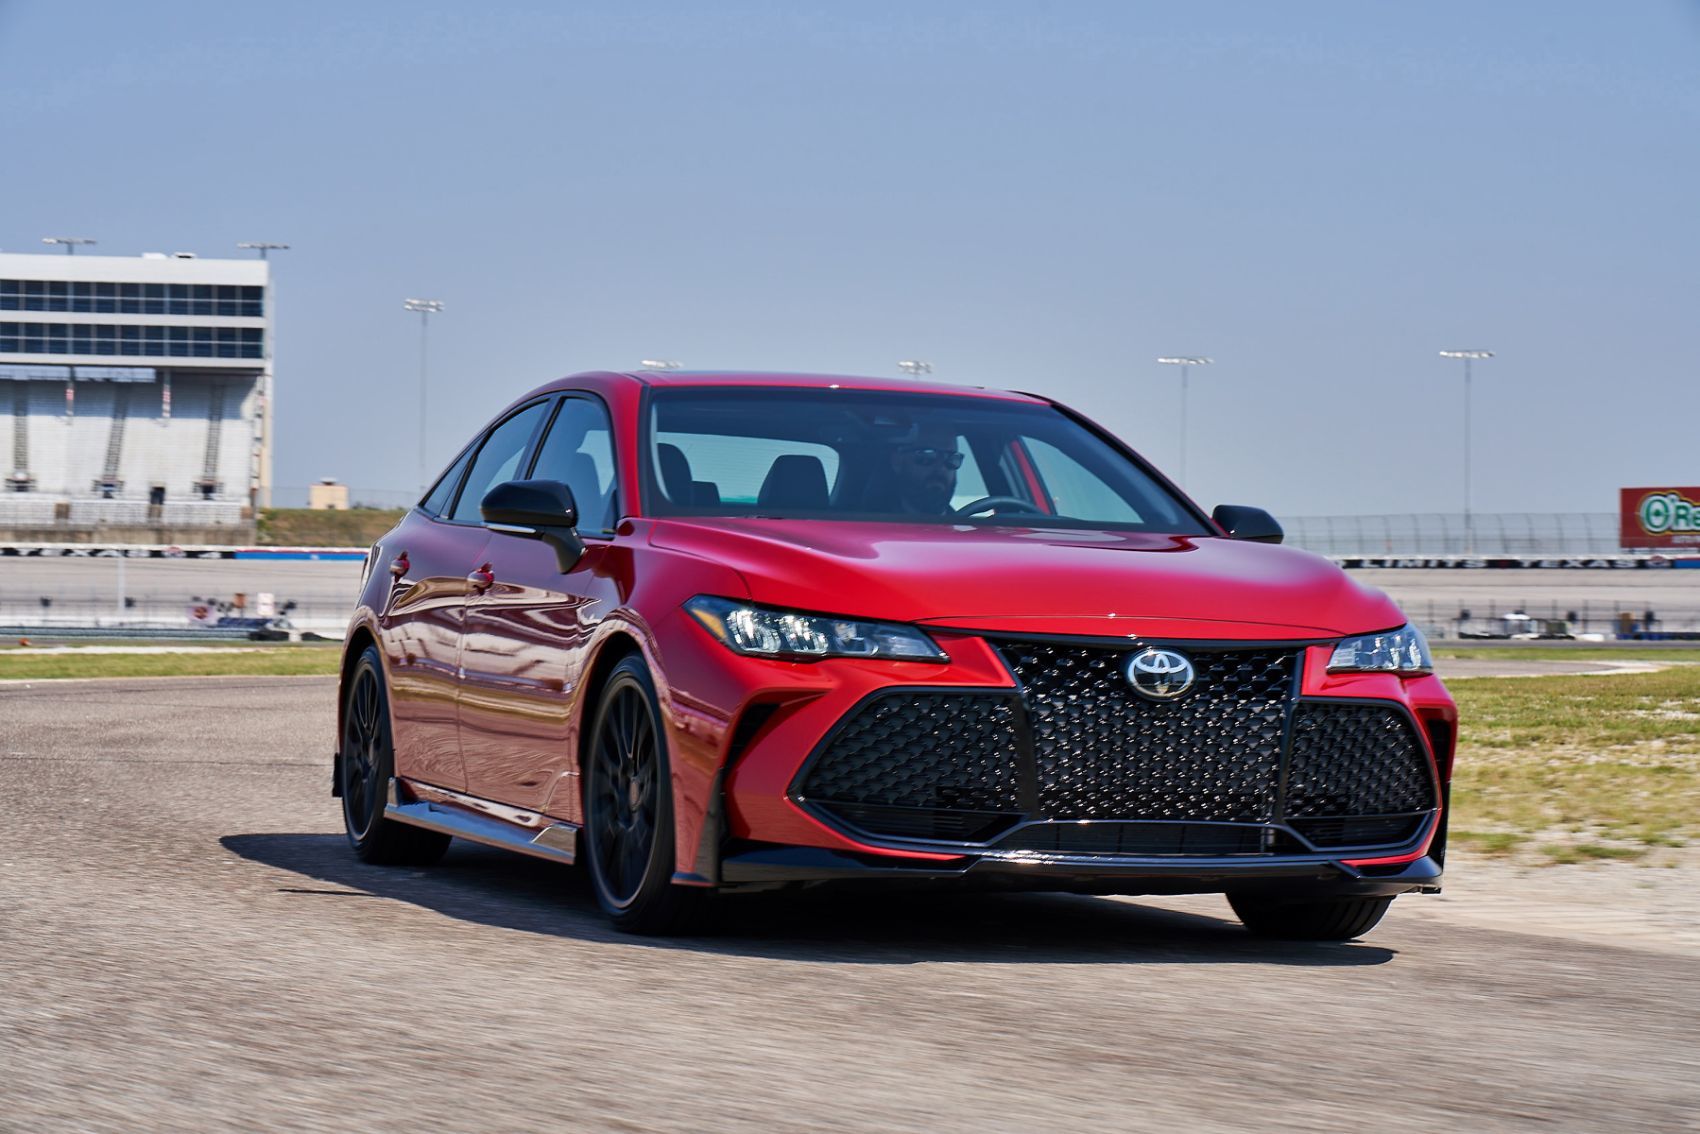 2020 Toyota Avalon TRD Review: More Playful Than Your Average Daily Driver